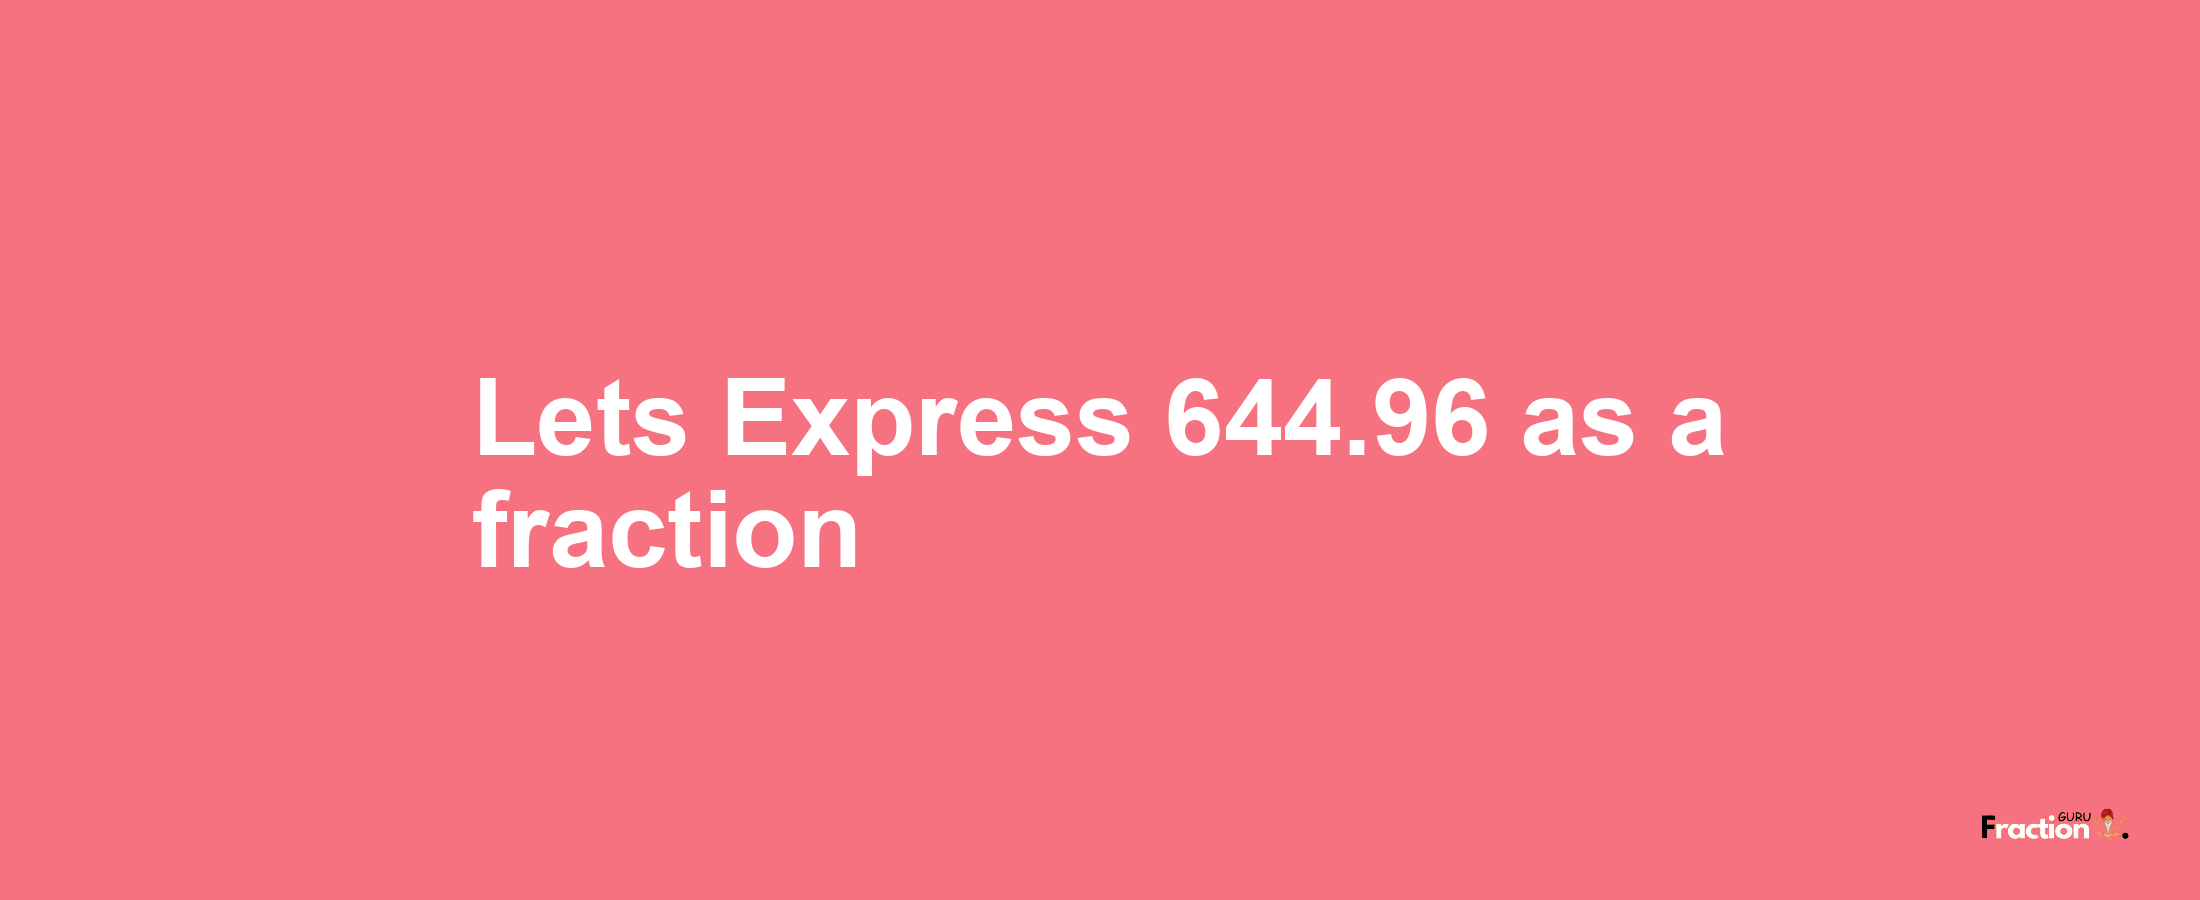 Lets Express 644.96 as afraction